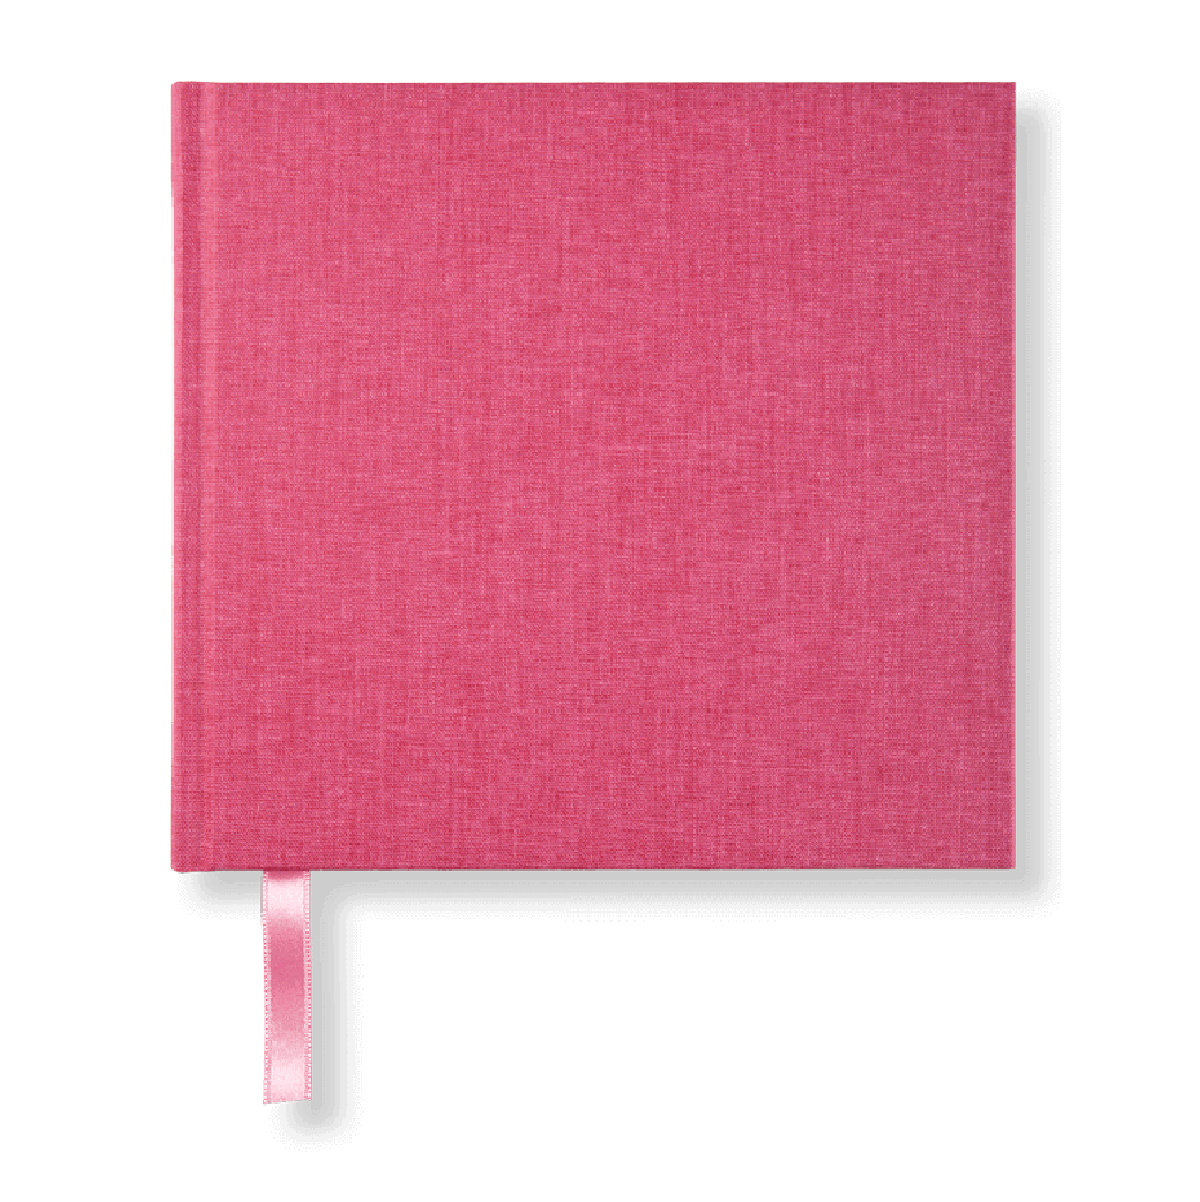 PaperStyle Paperstyle BLANK BOOK 185 x 185 Raspberry Sorbet